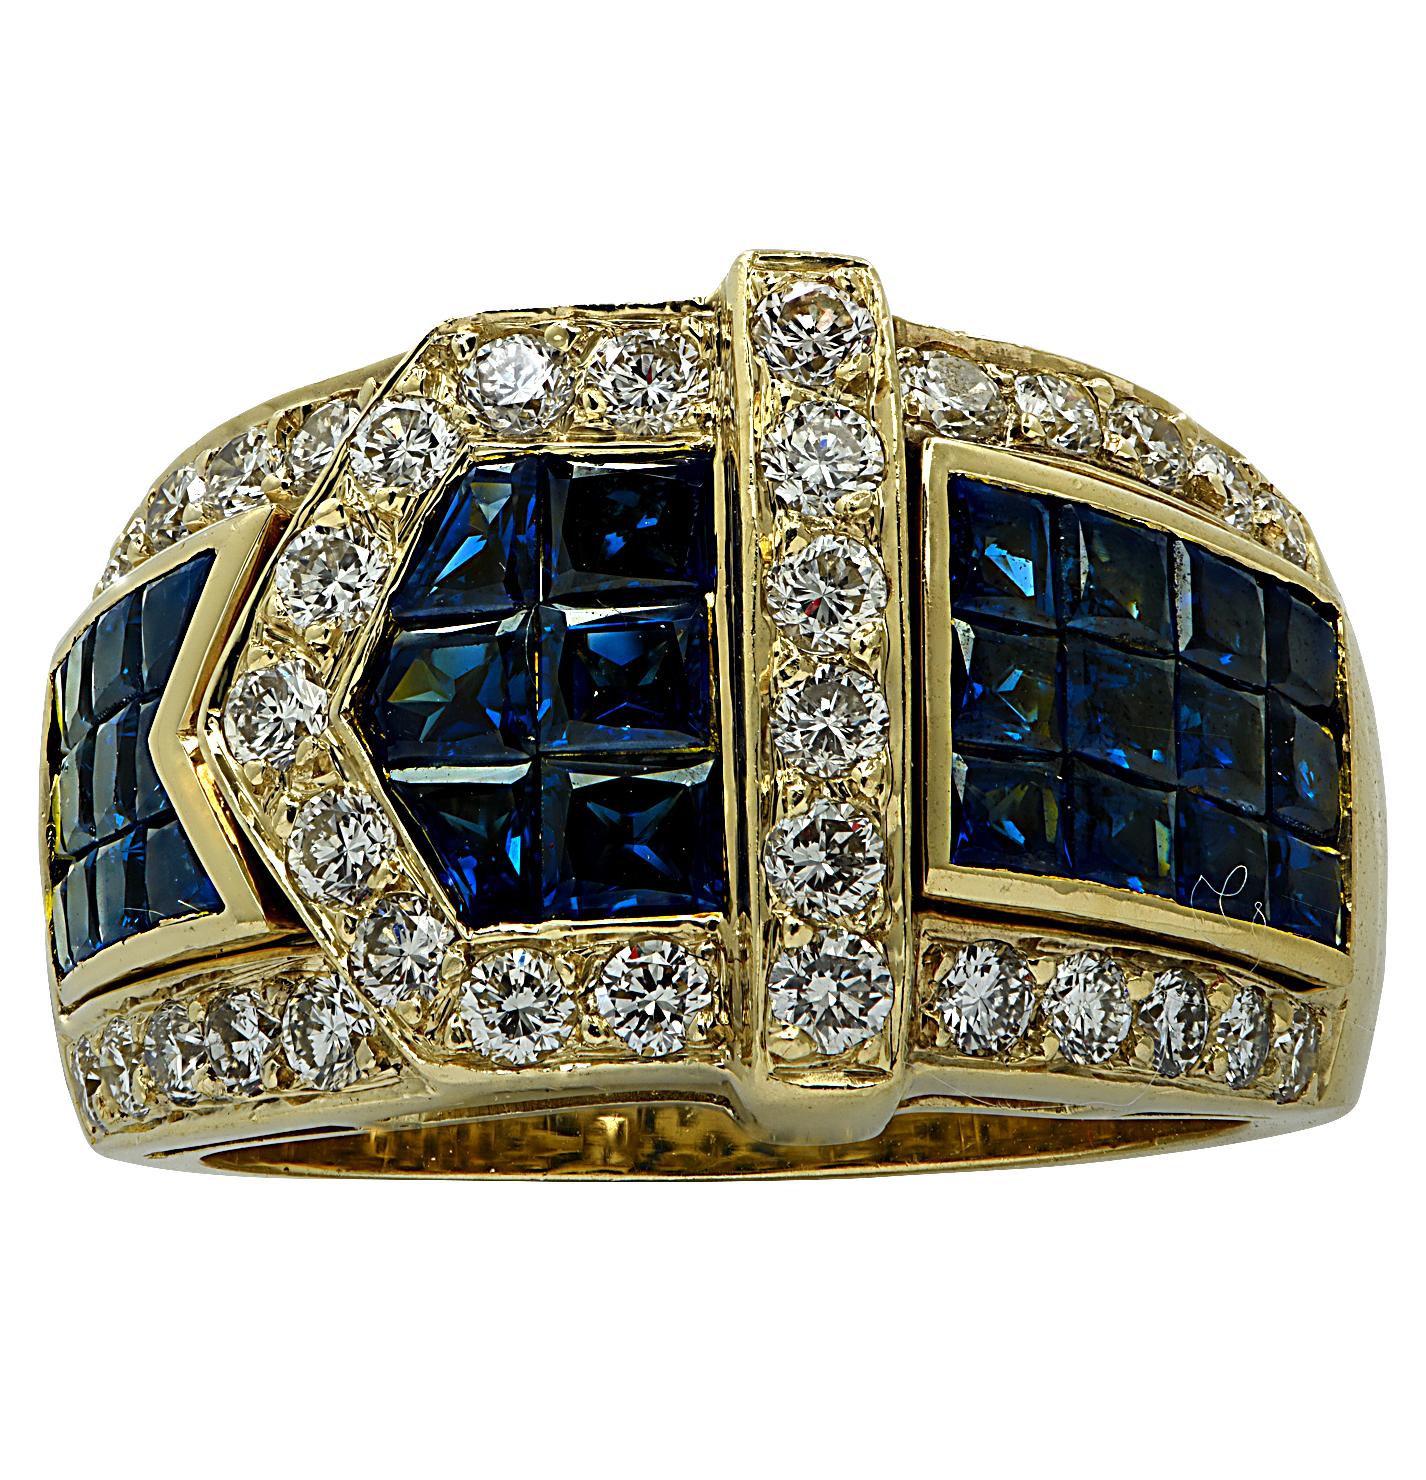 Enchanting ring crafted in 18 karat yellow gold, featuring 30 Sapphires weighing approximately 1.80 carats total, and 25 round brilliant cut diamonds weighing approximately 1 carat total, G color, VS clarity. The ring is fashioned into a belt, with